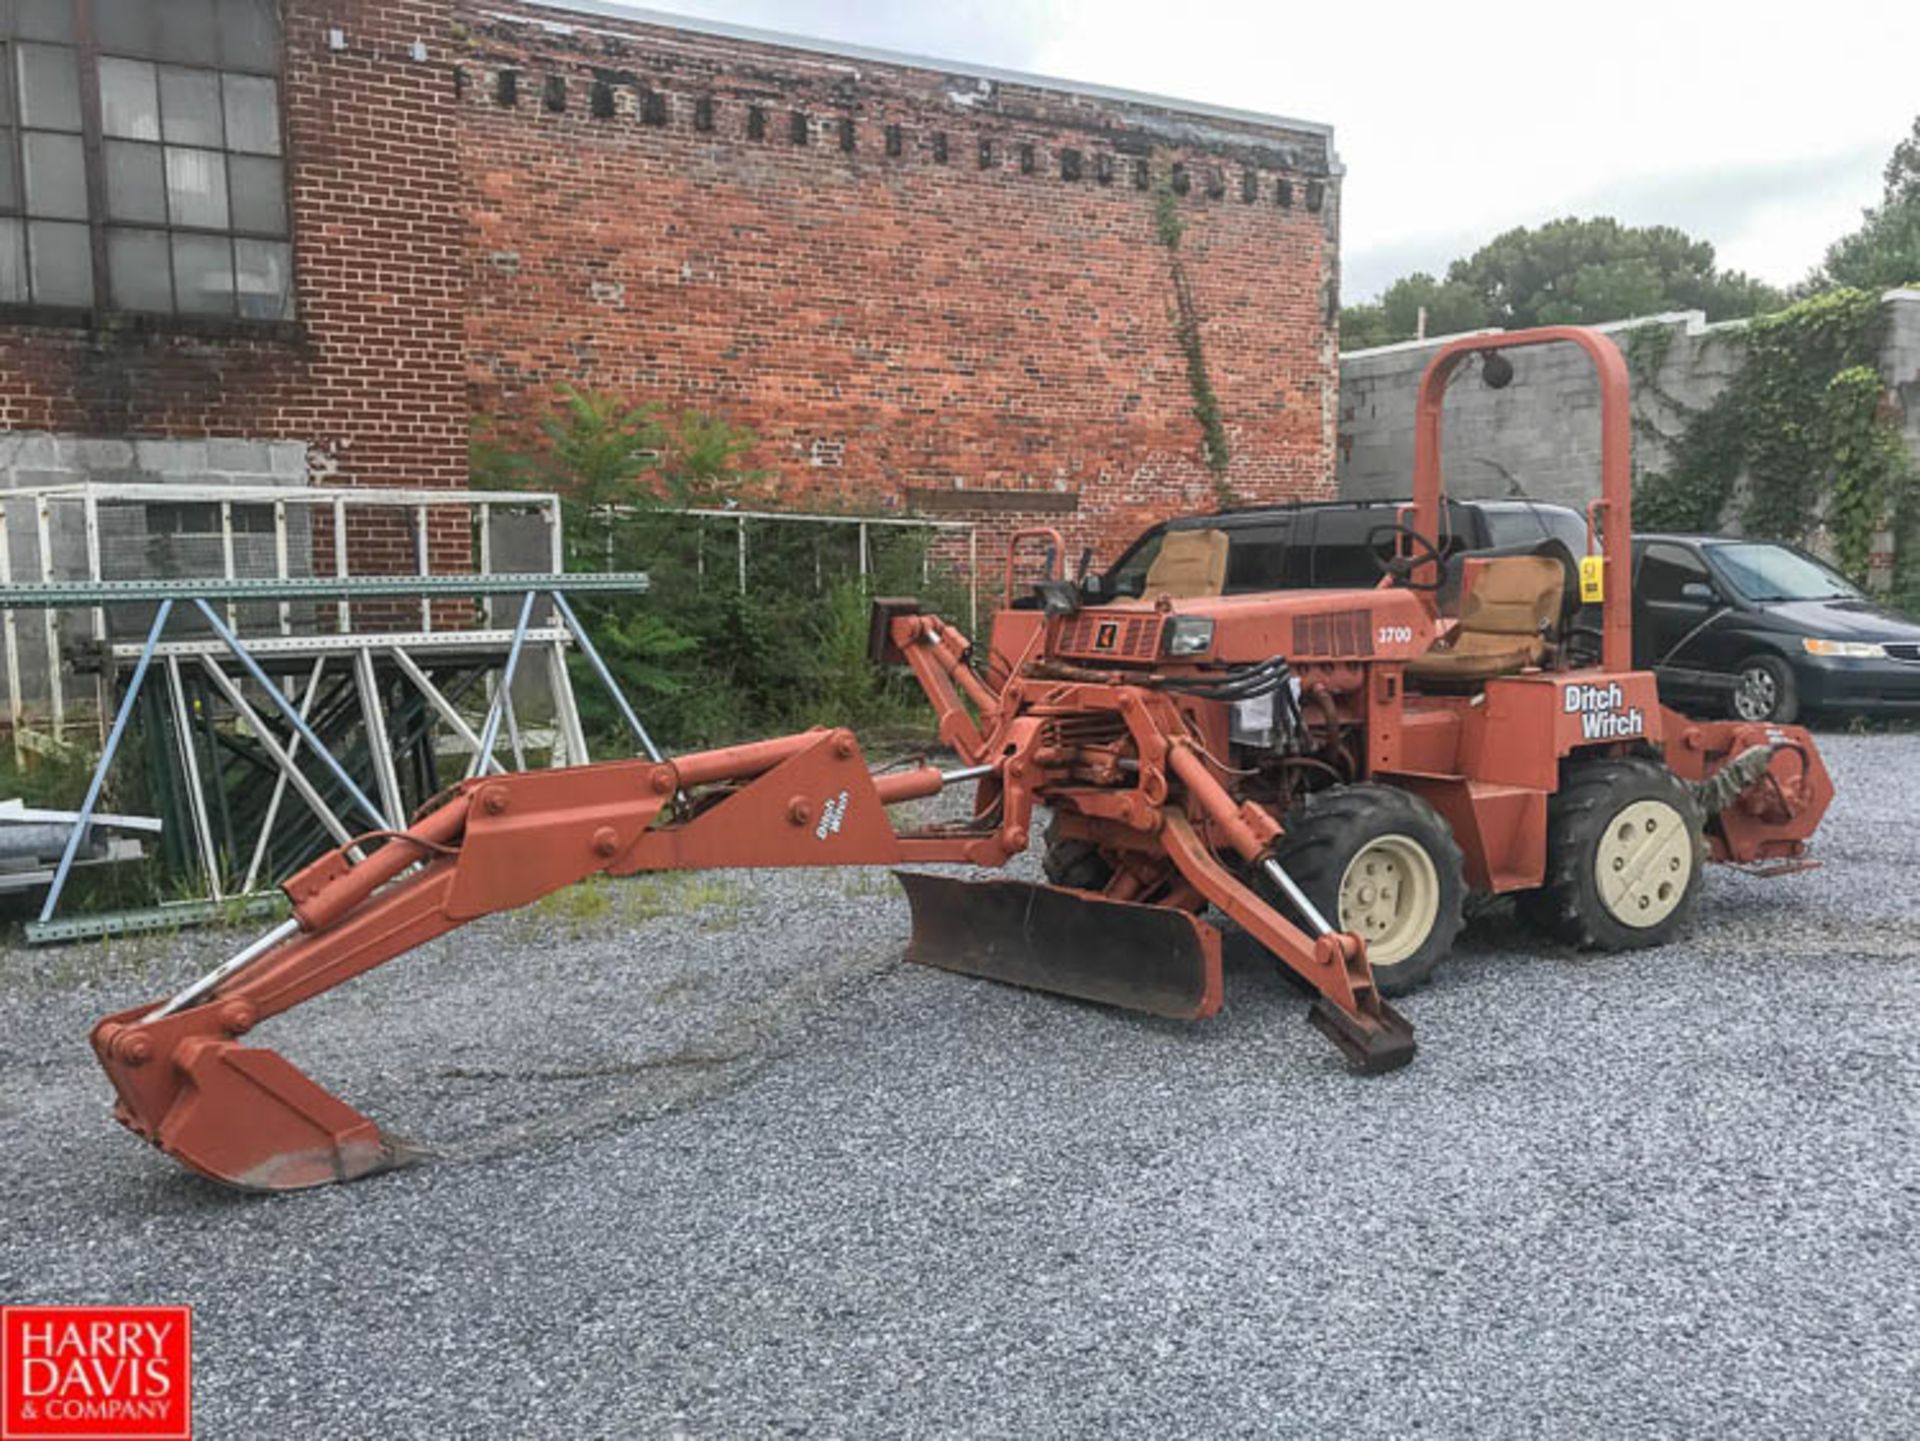 Ditch Witch Trencher Model 3700 with Bucket and Blade Attachment Rigging Fee: $ 25